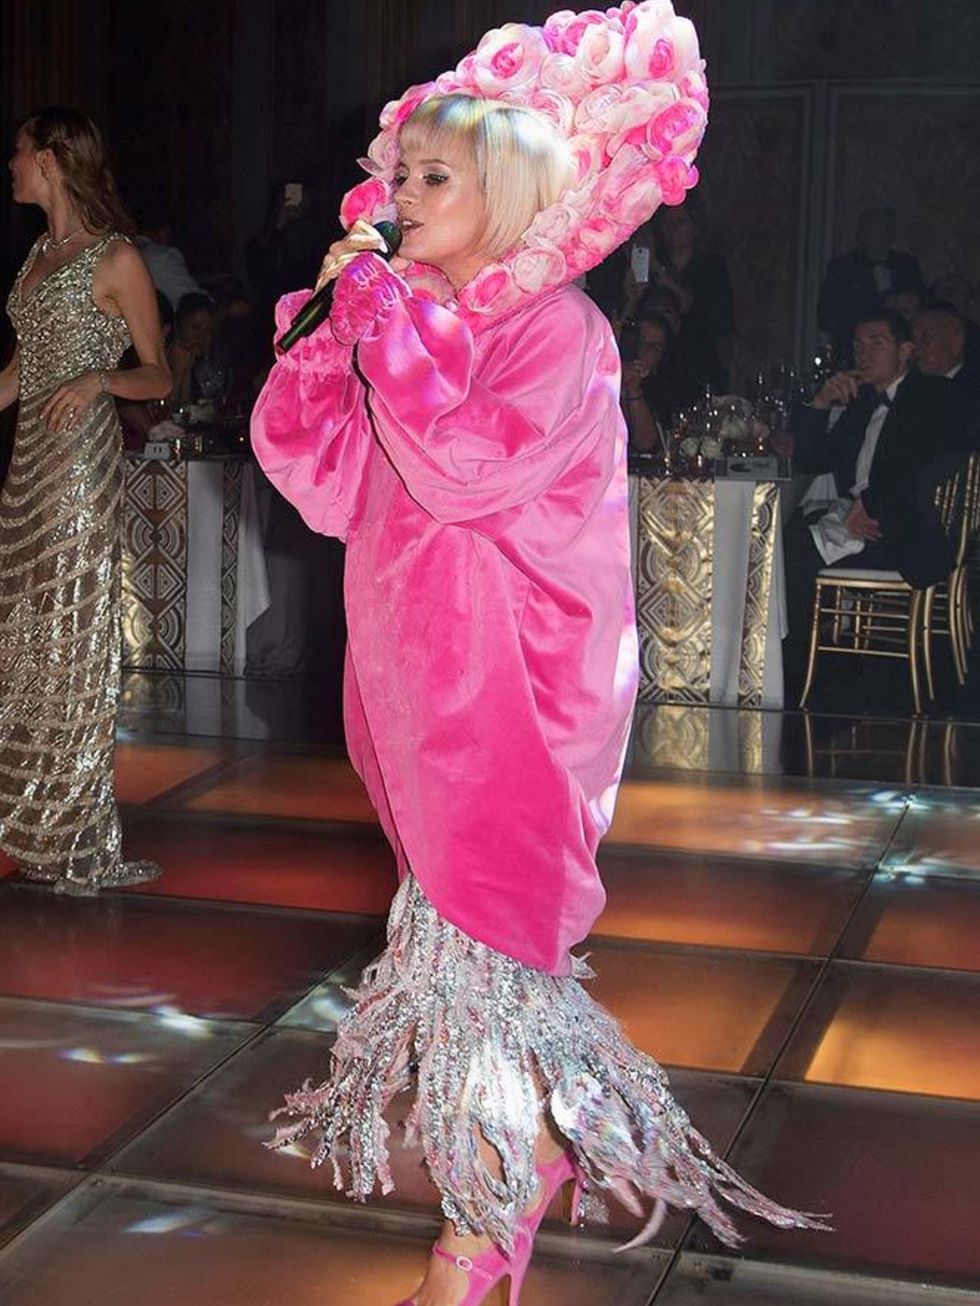 Lily Allen performing at the 61st Rose Ball in Monaco, March 2015.